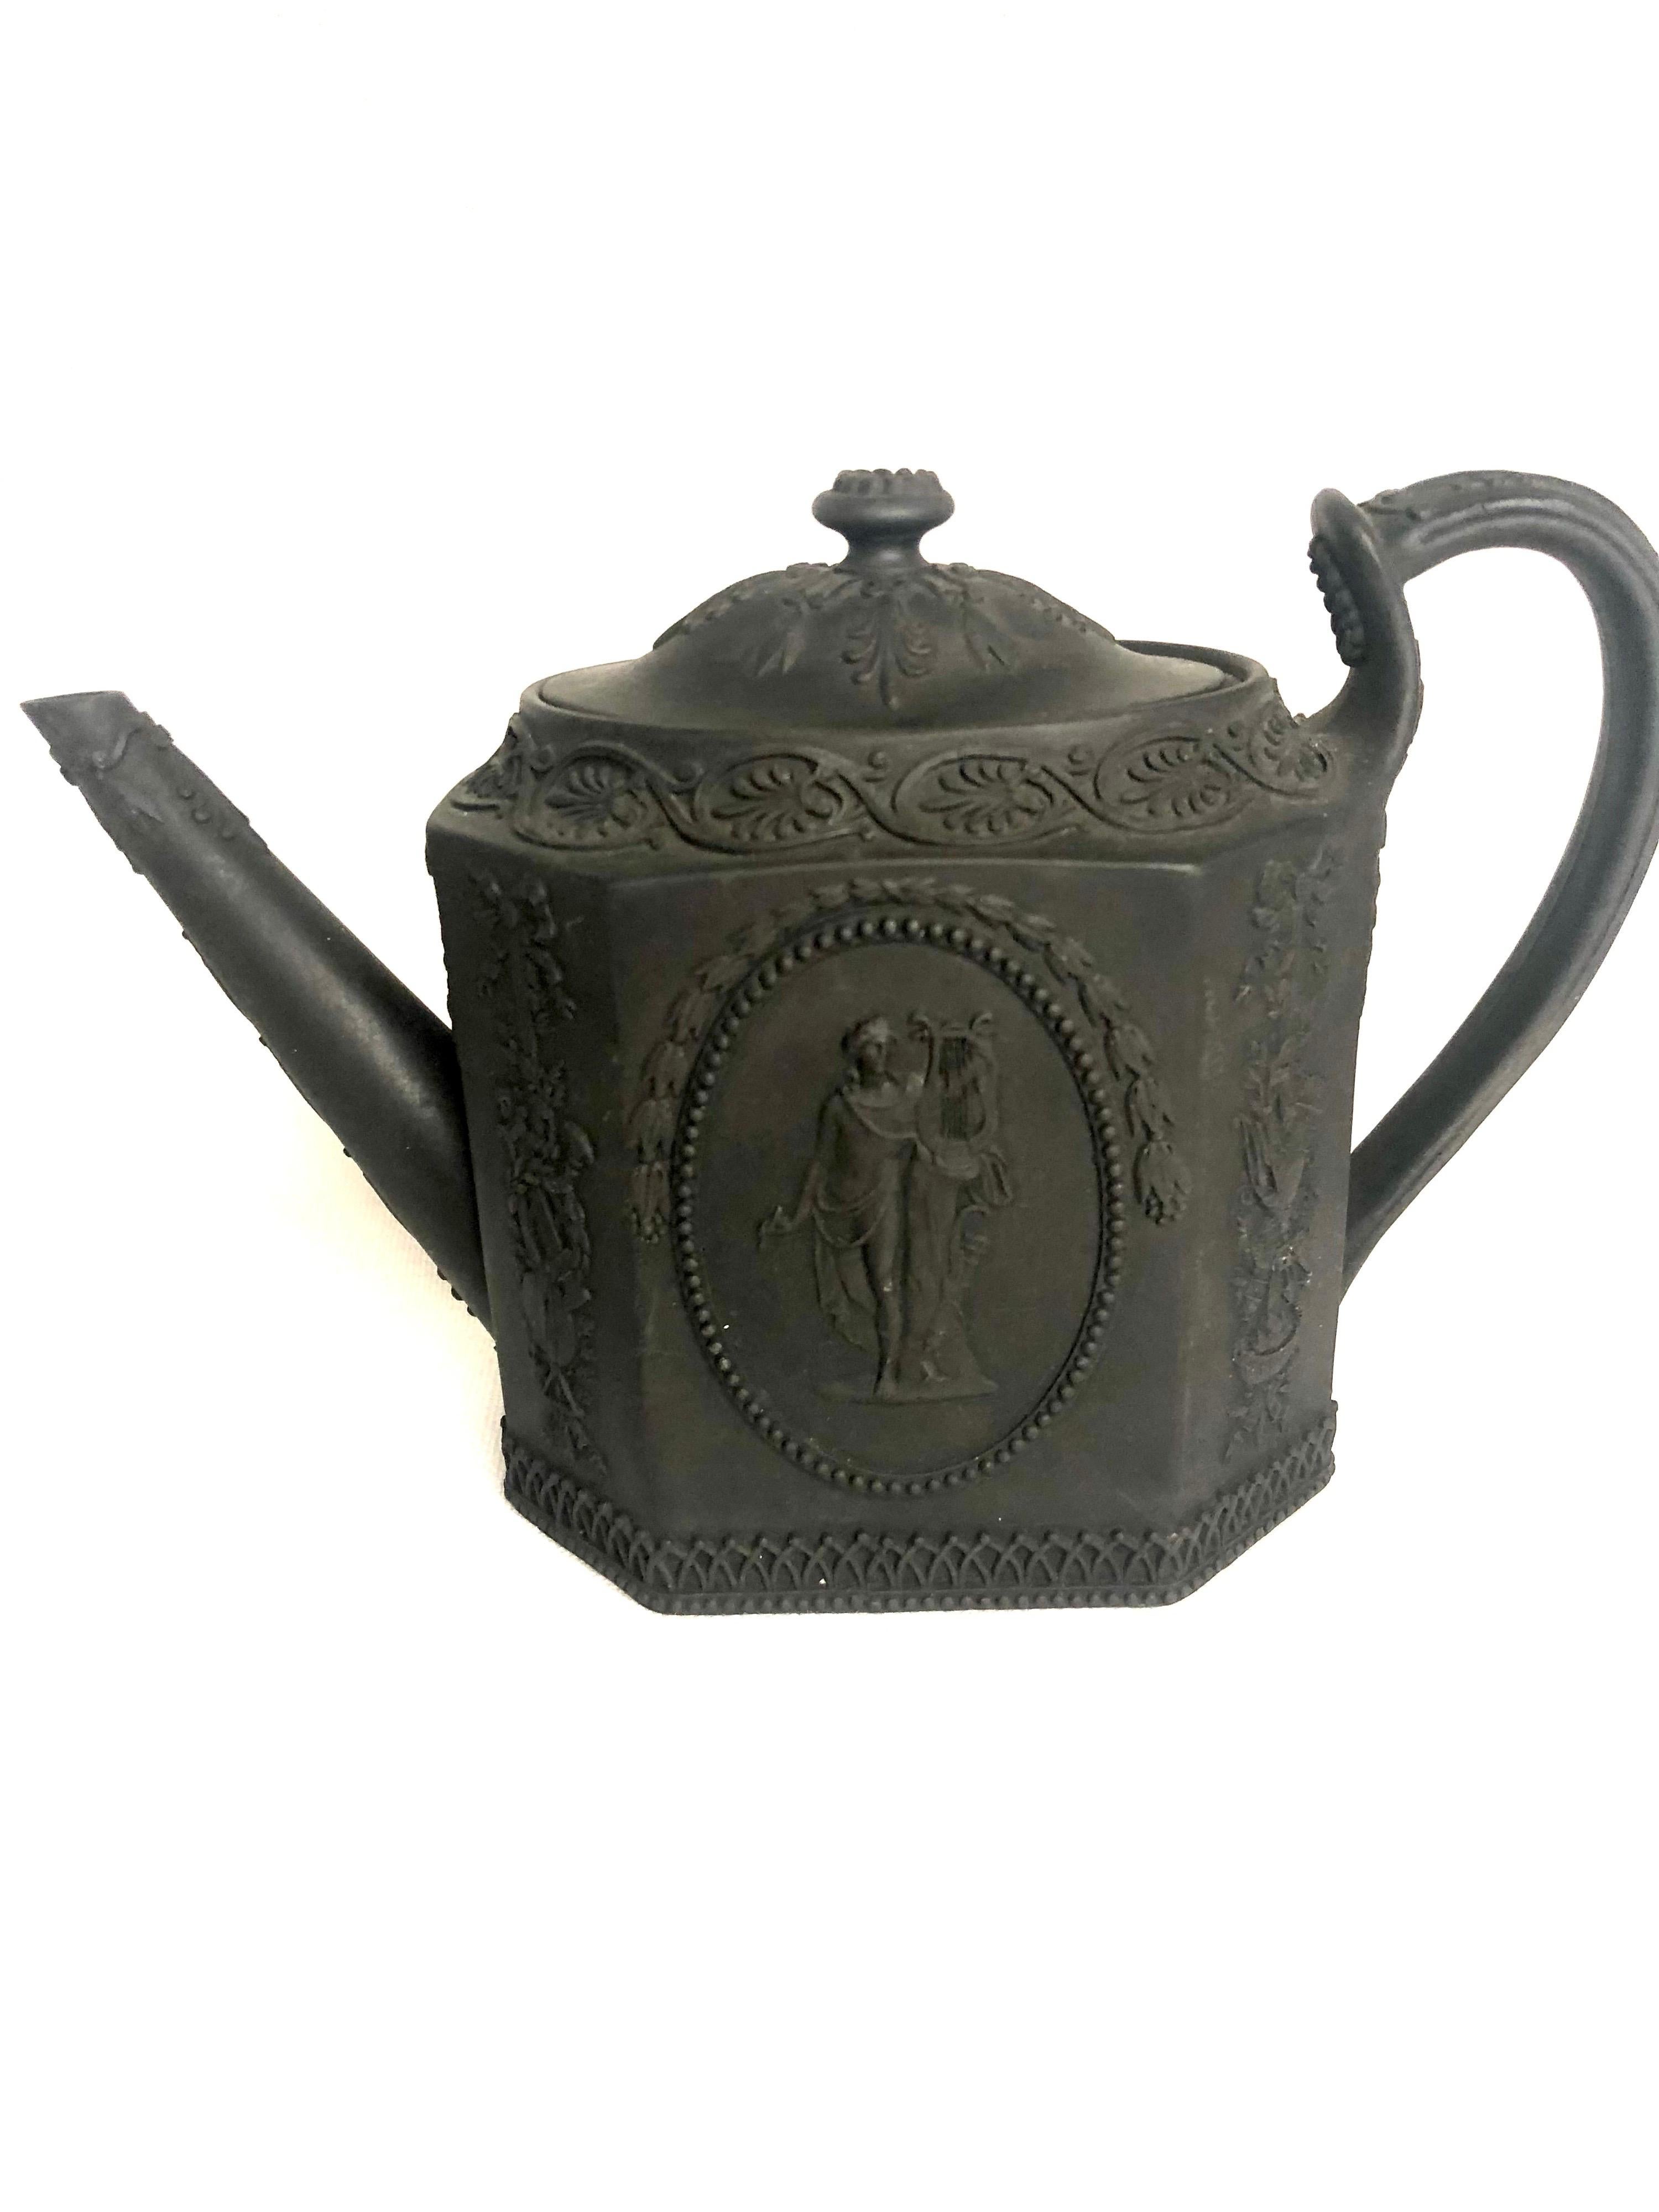 Basalt Wedgwood Teapot with Medallions of Man with Lyre and Lady on Pedestal For Sale 3